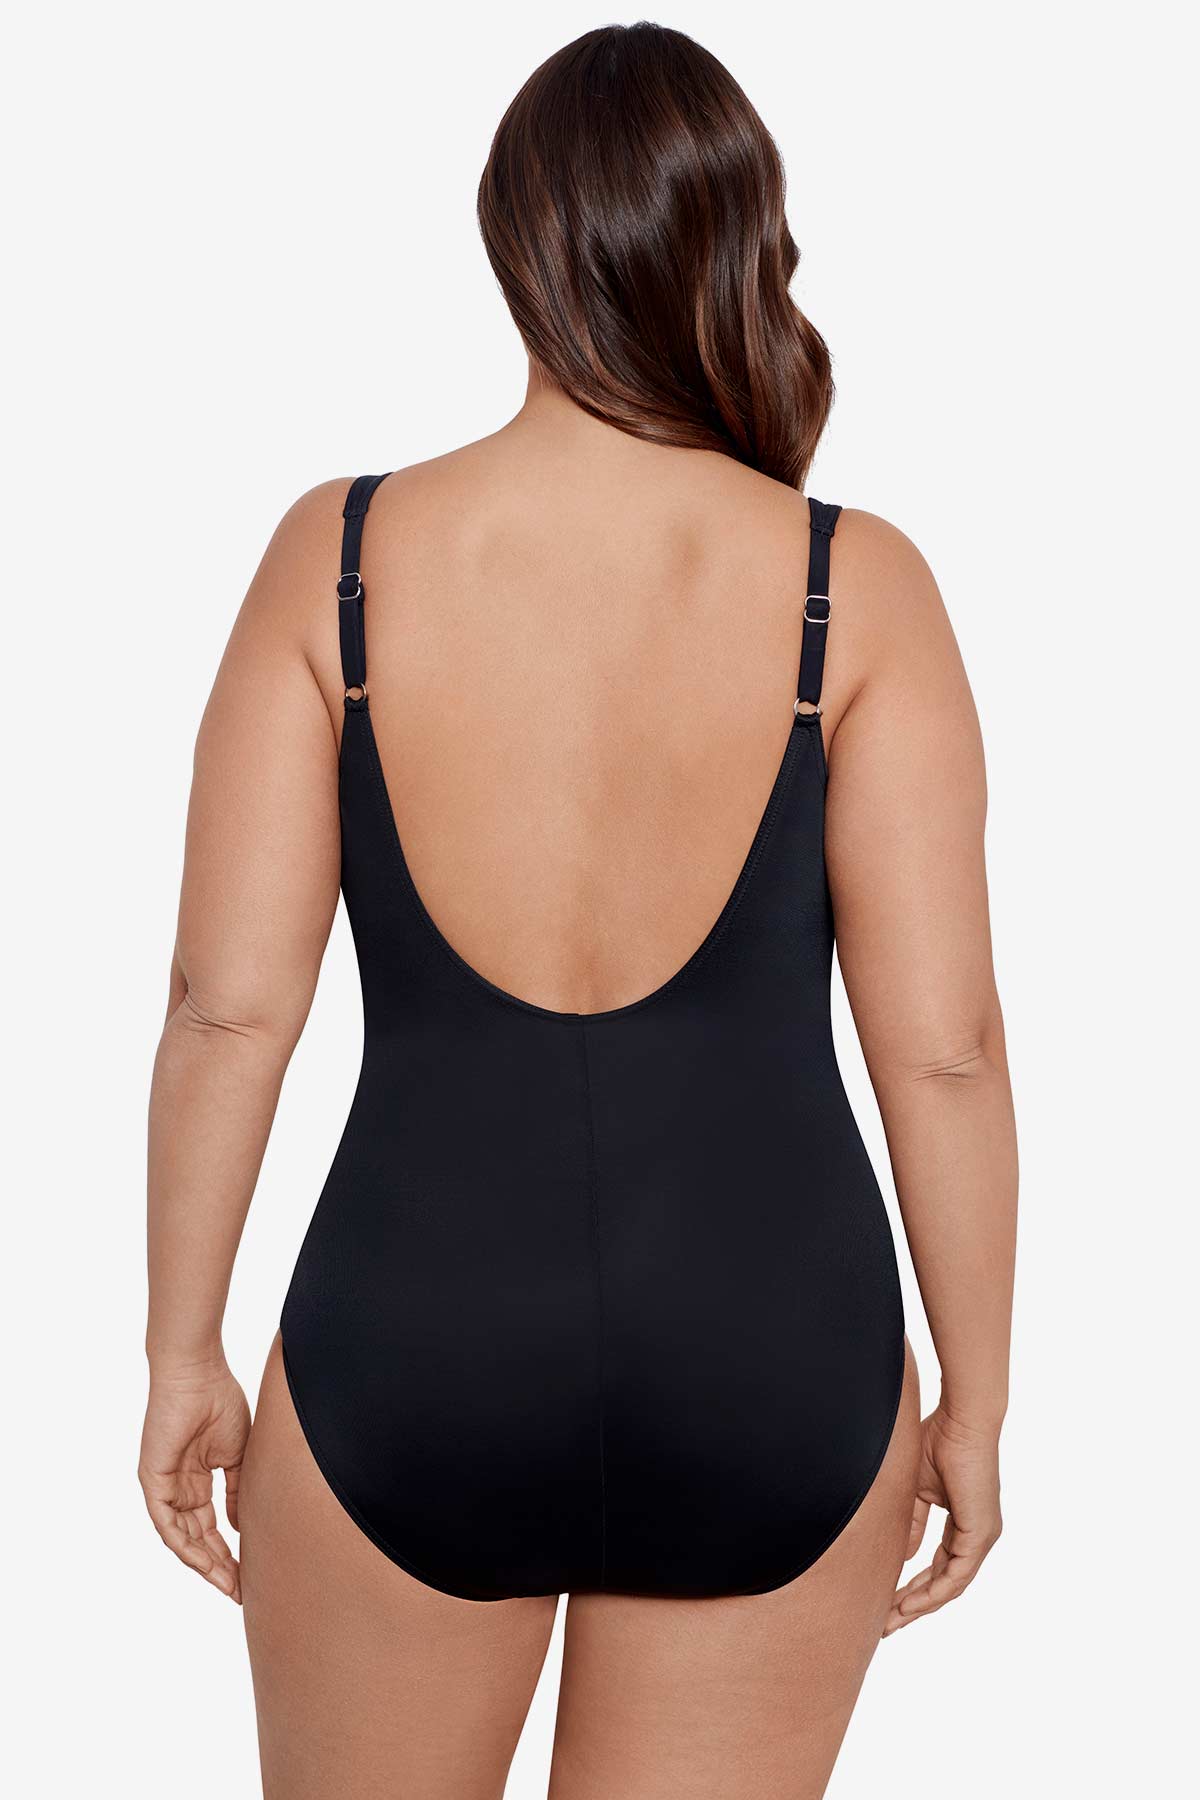 Customizable Plus Size Black One Piece Swimsuit For Women Sexy Happy  Halloween Bras N Things Bodysuits For Surfing, Beach Wear, And More! From  Xieyunn, $20.48